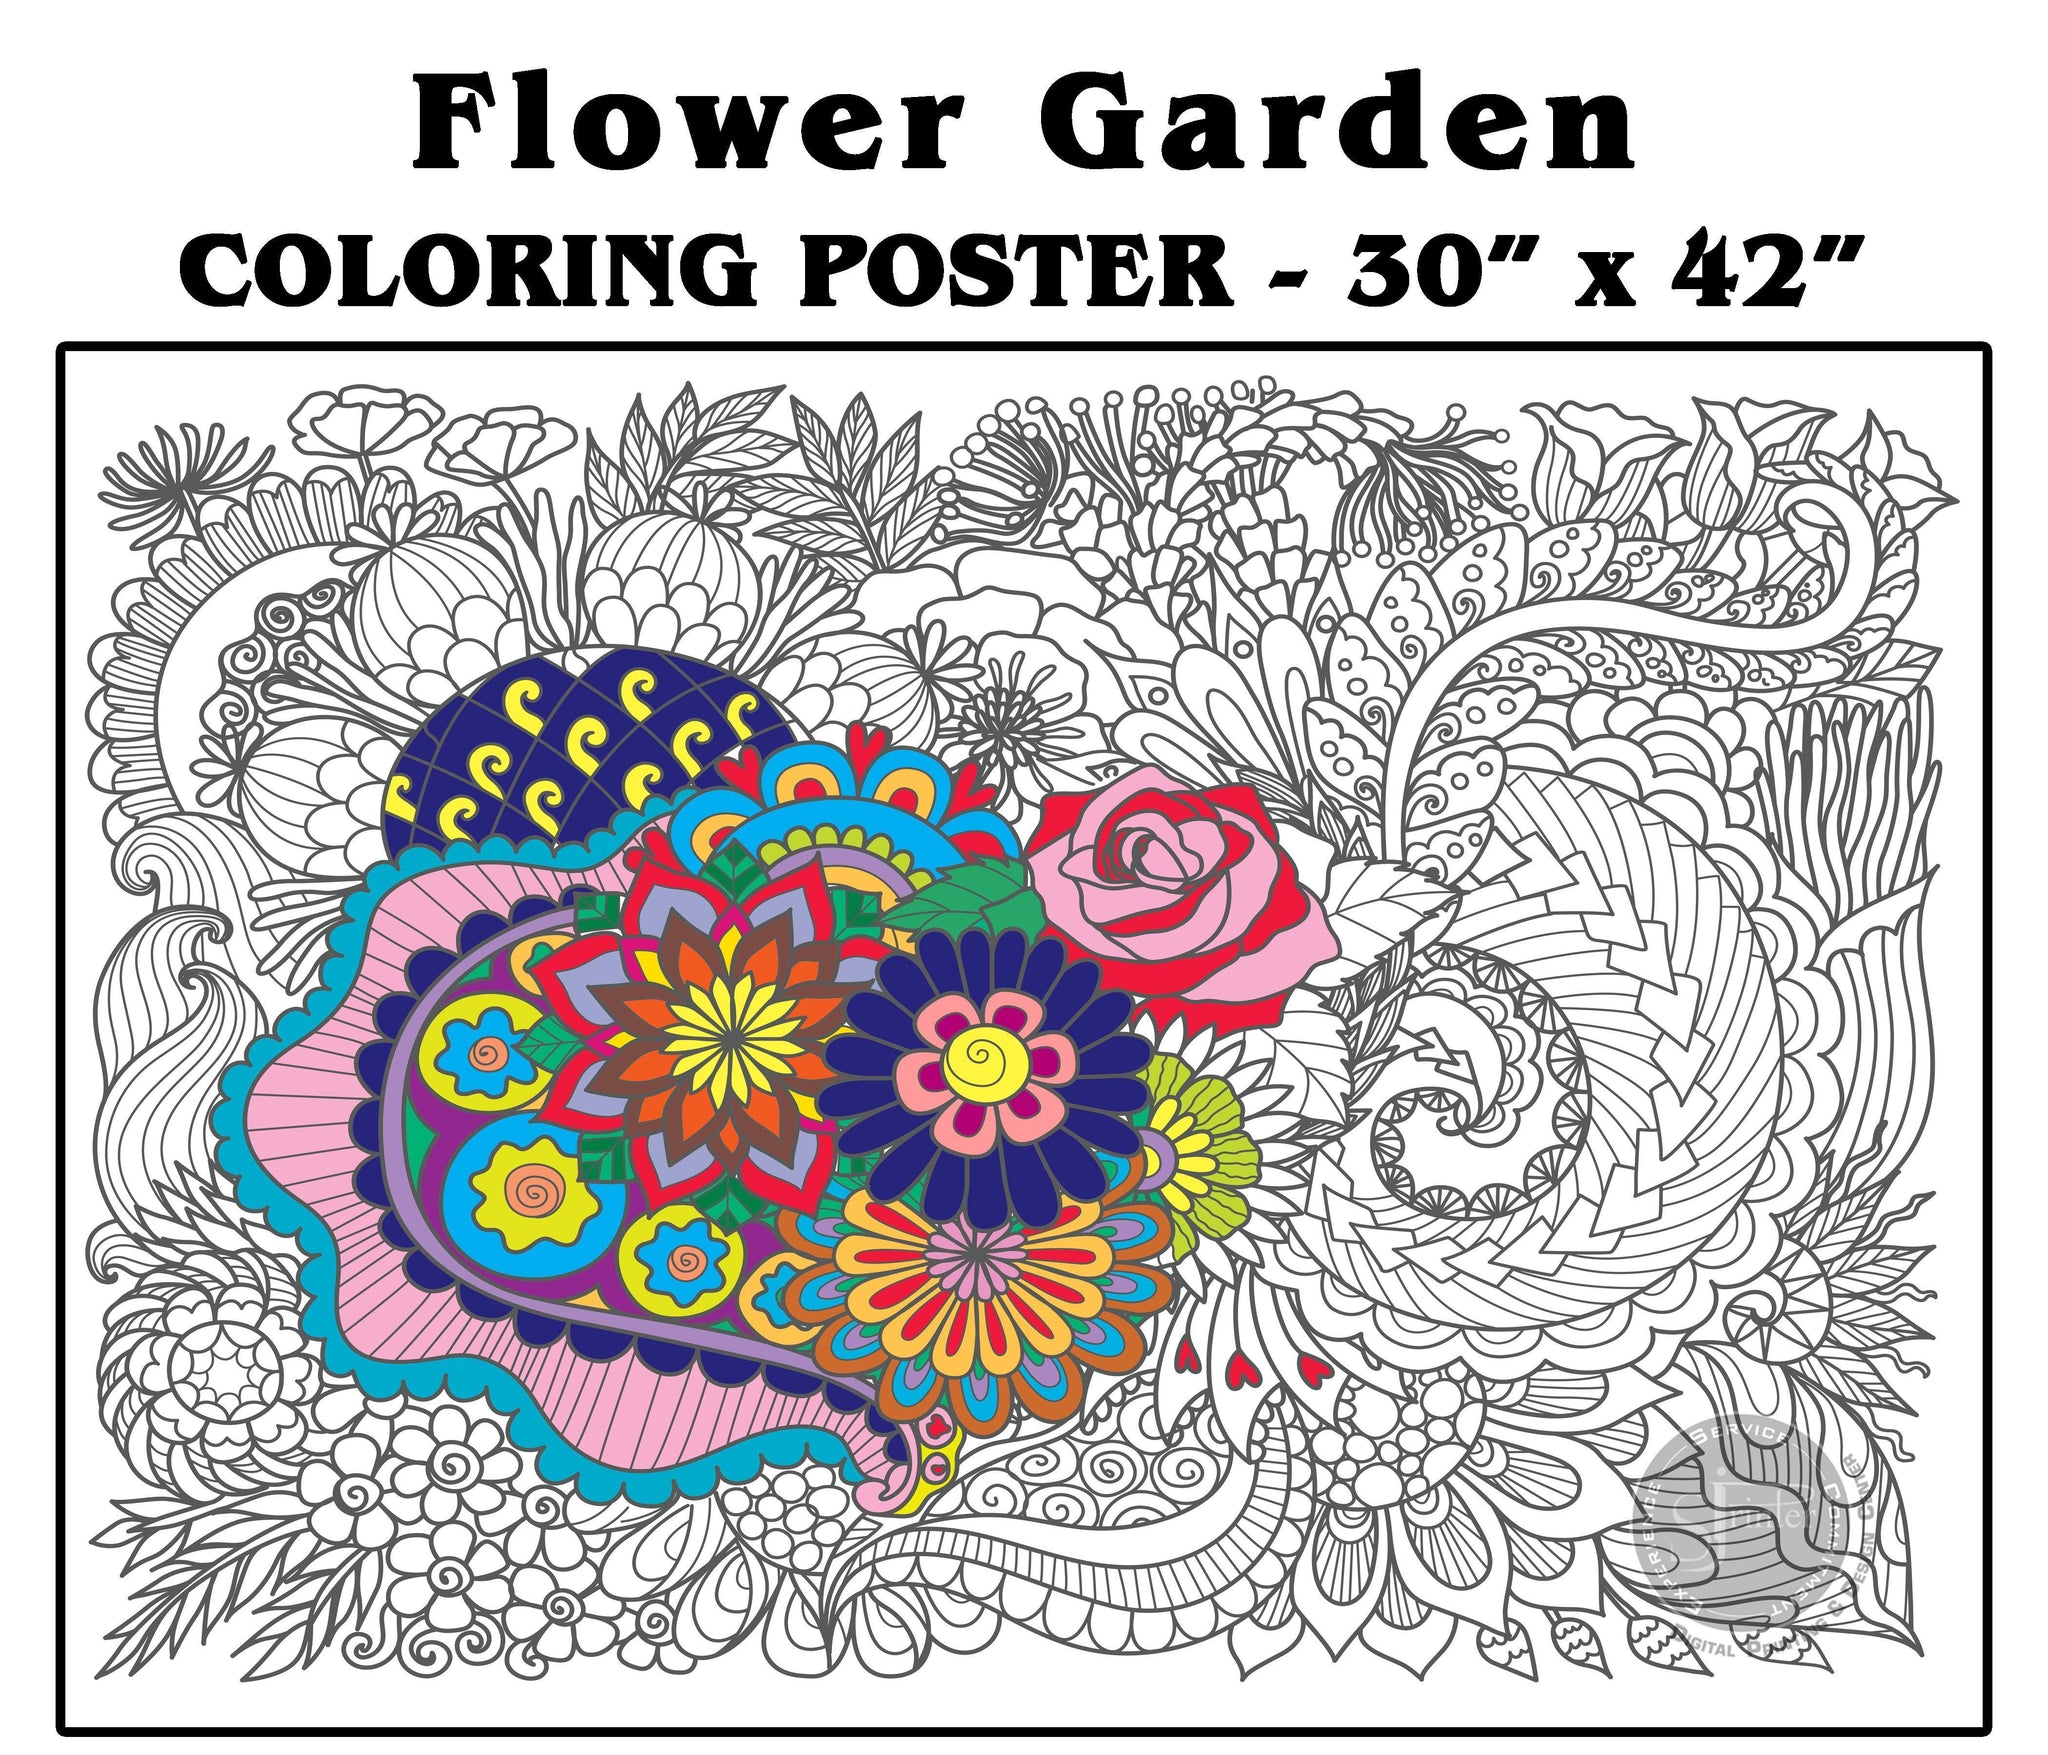 Flower and Garden Coloring Books for Adults